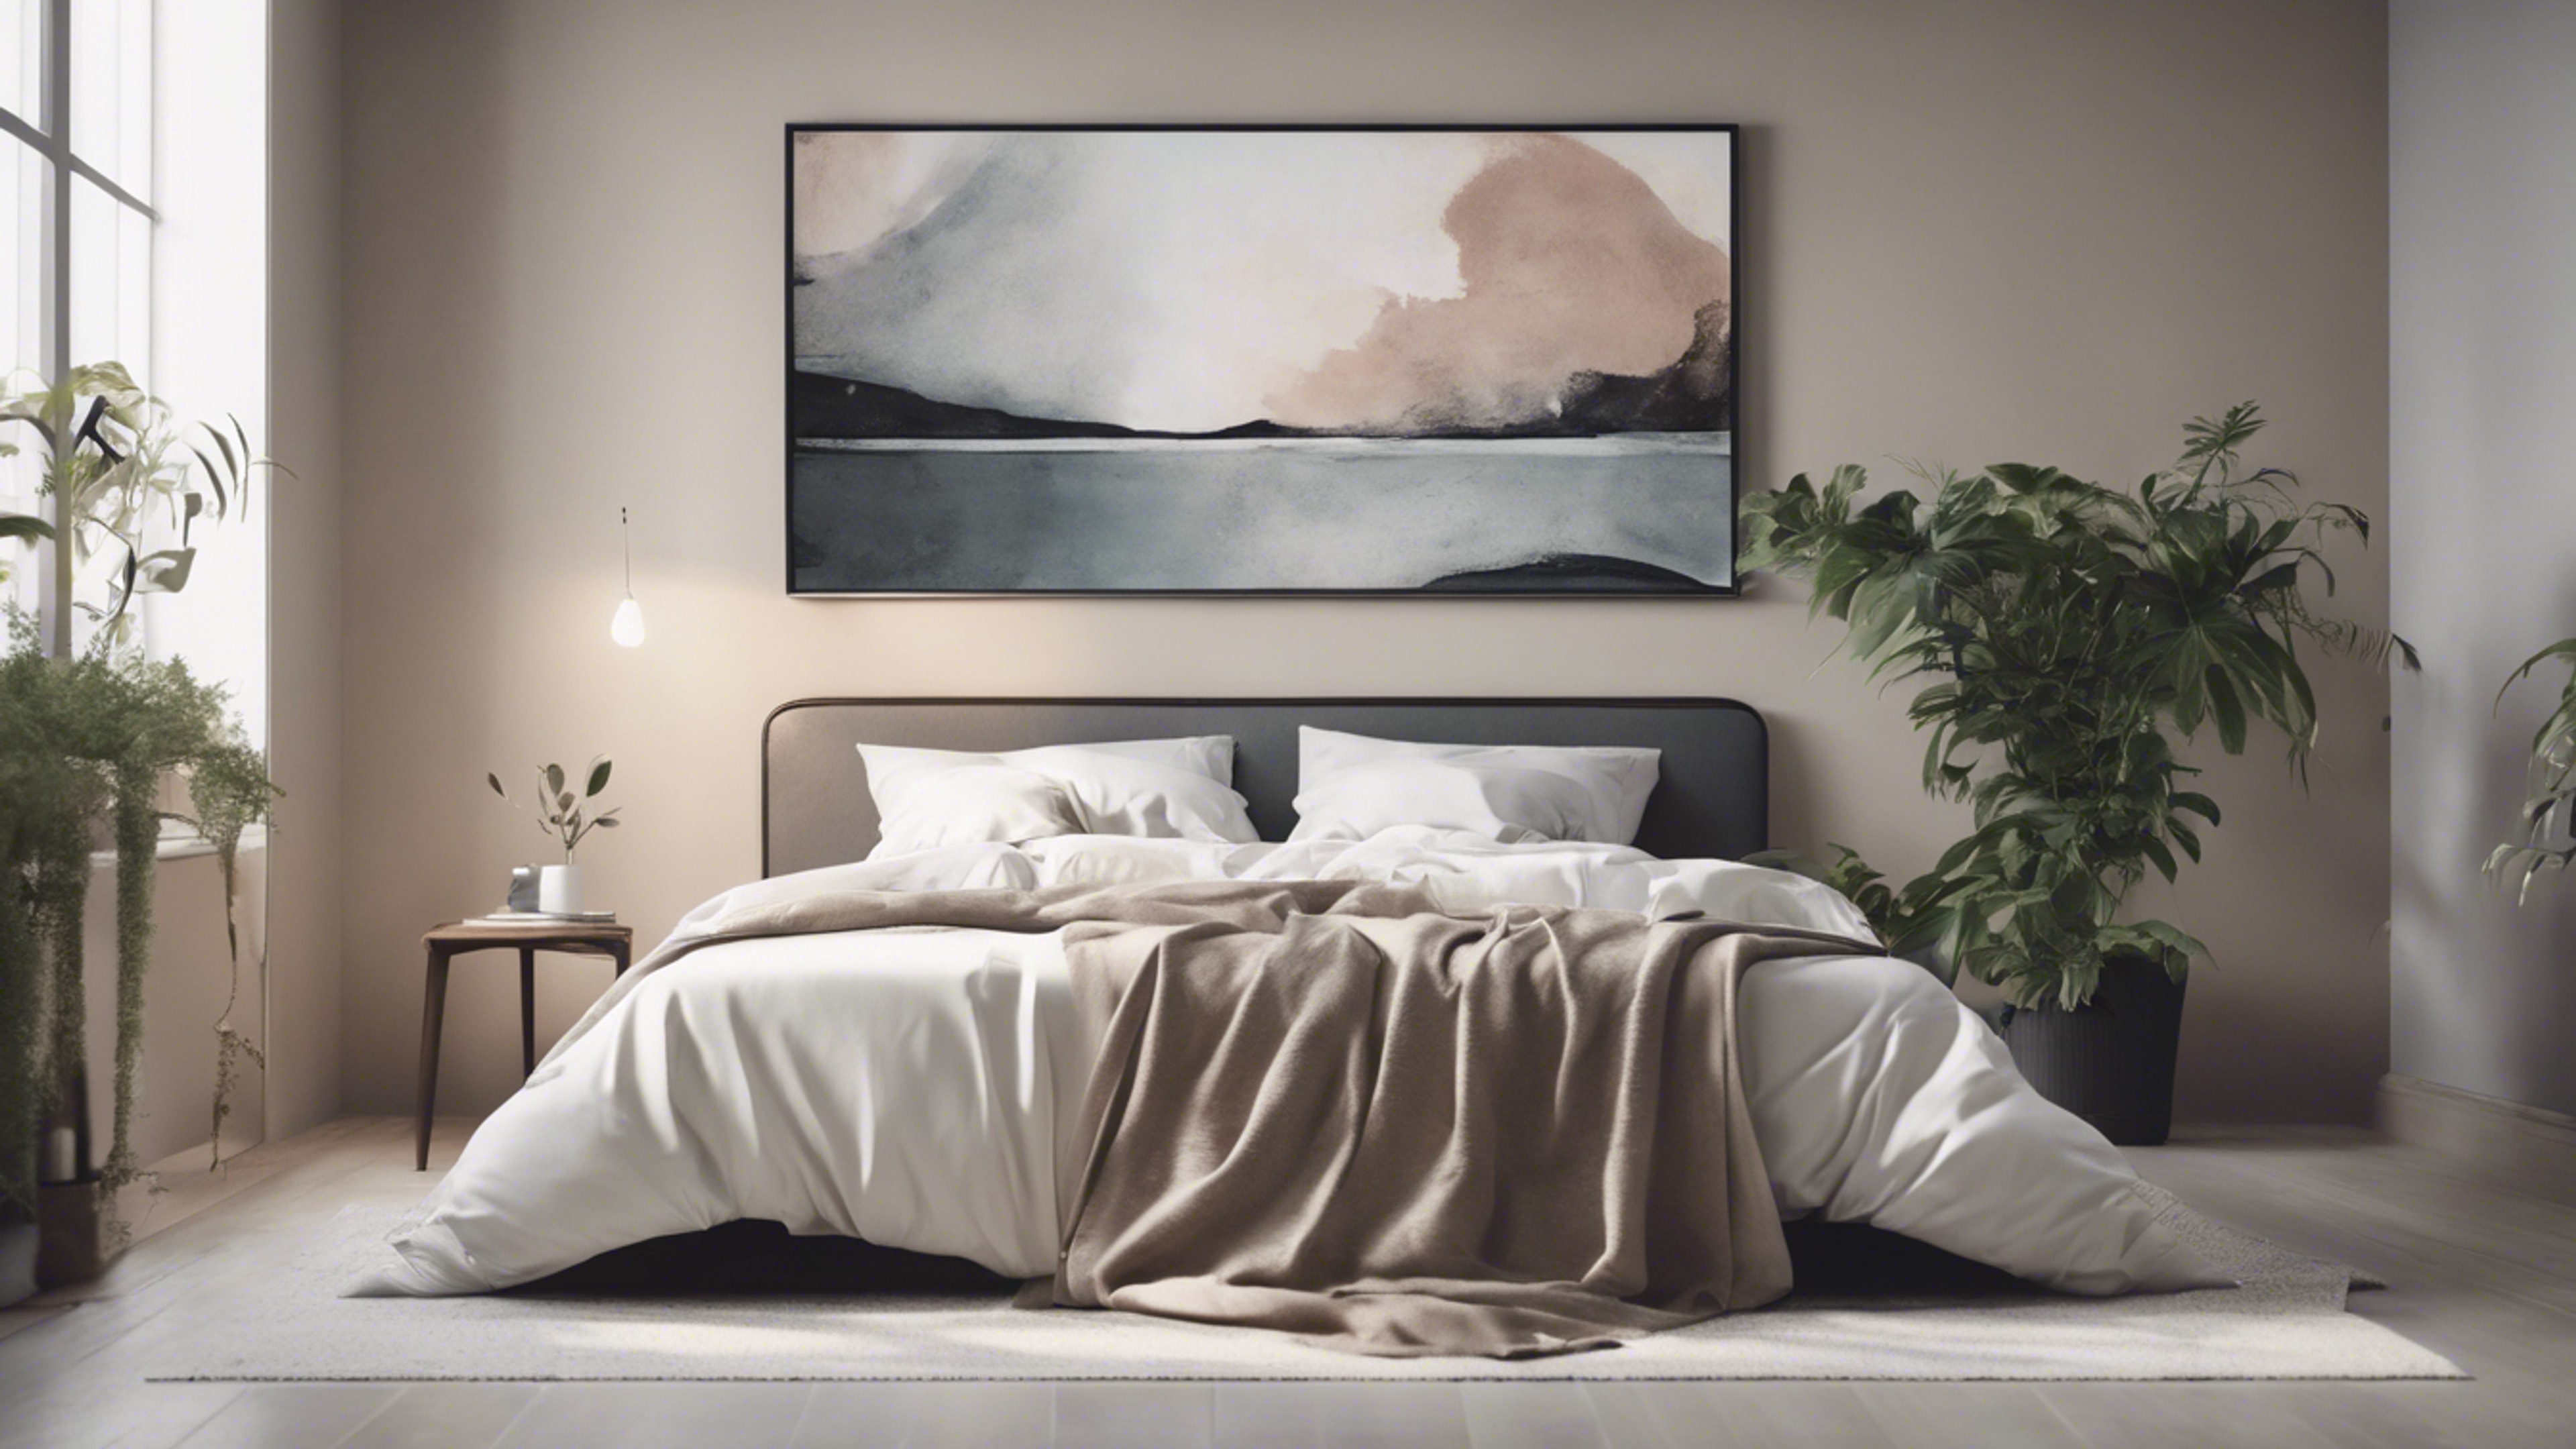 Minimalist bedroom in muted tones with a simple queen-sized bed, a potted plant, and an abstract painting. Fond d'écran[015f6f42387b4ed28c5e]